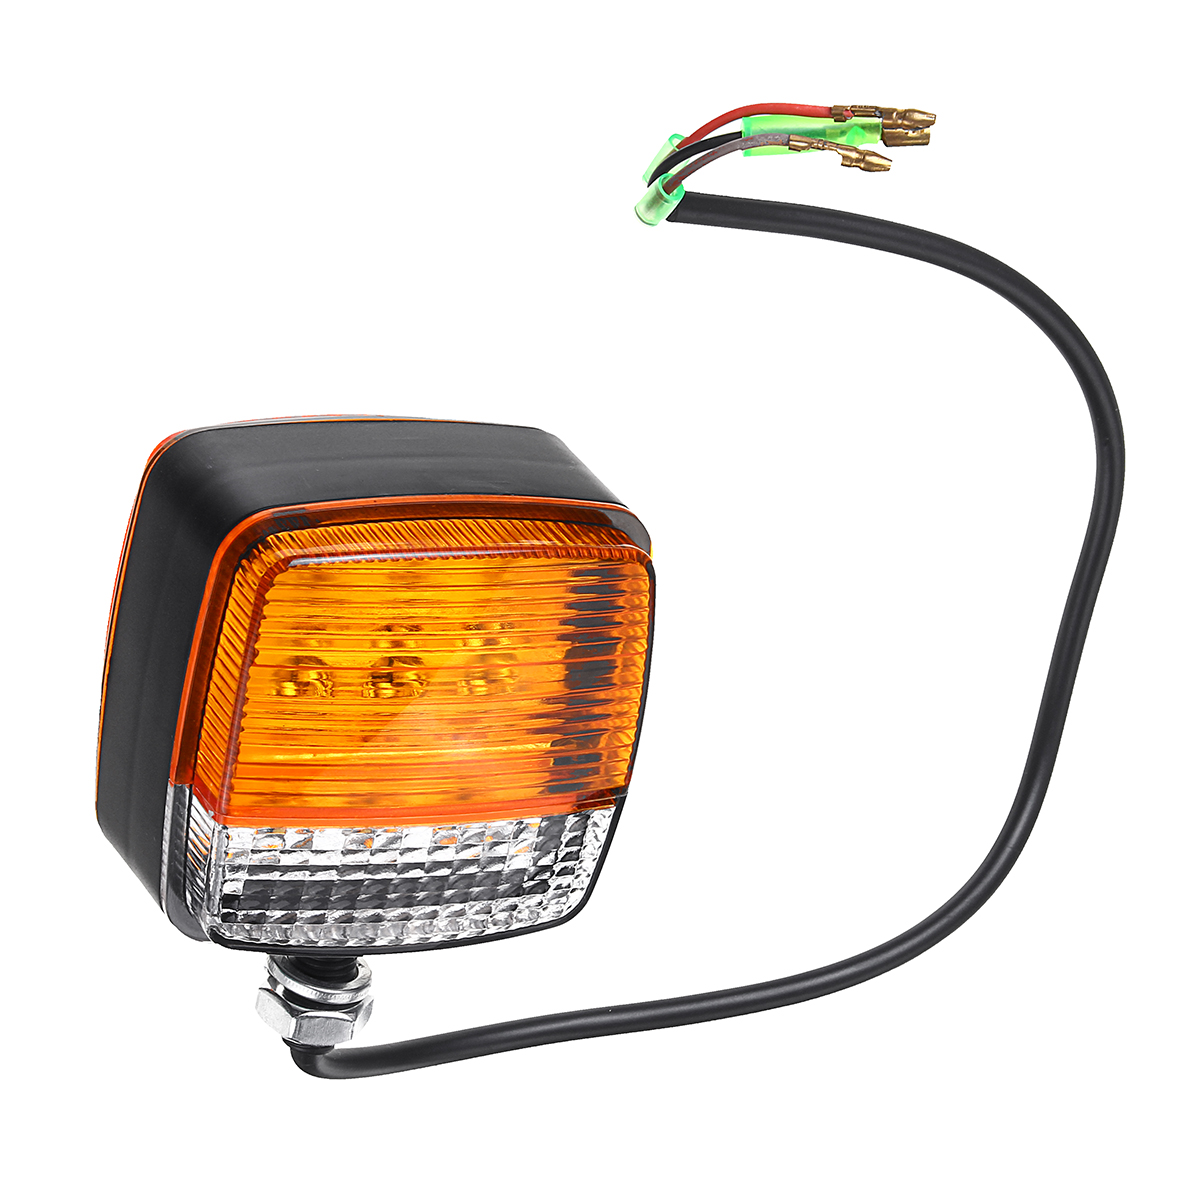 12V-80V Dual Side Waterproof LED Running Tail Lights Turn Signal Lamp for Trailer Truck Boat Yacht Car Motorcycle